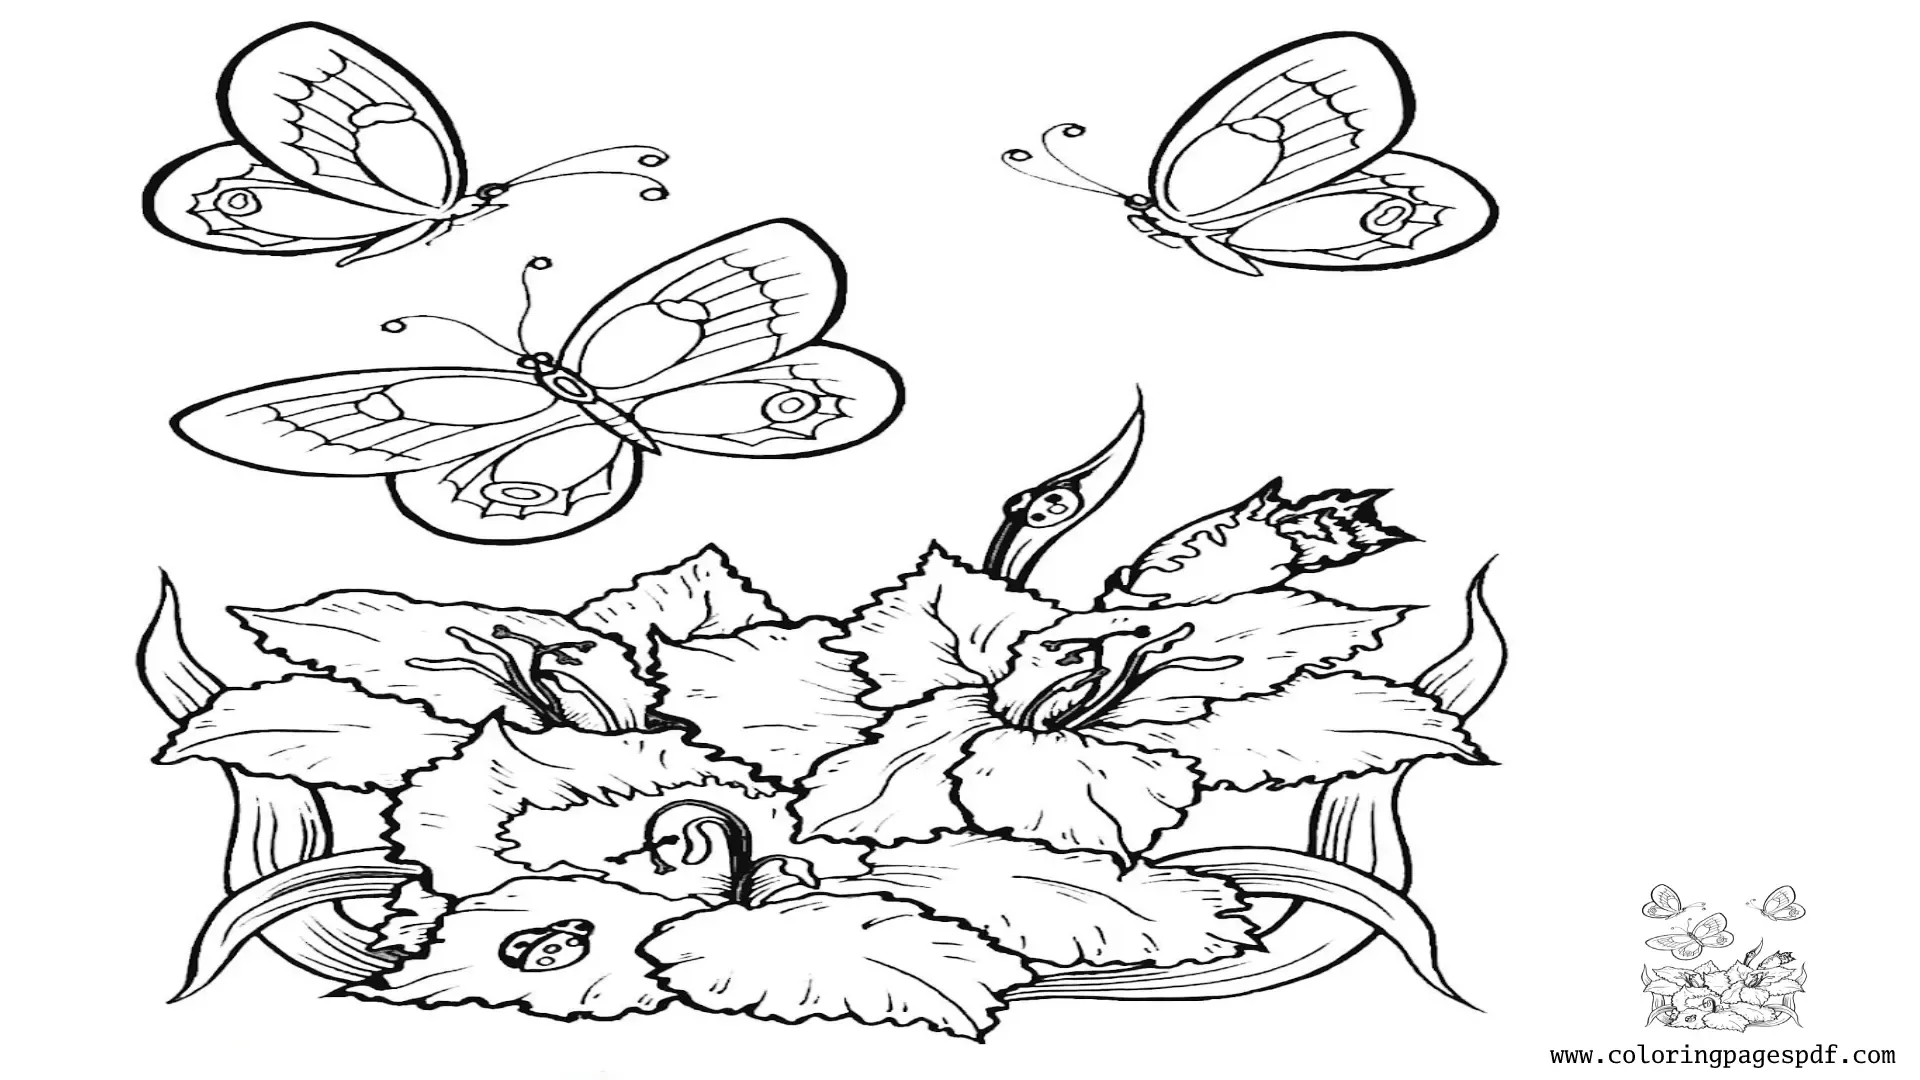 Coloring Page Of Three Butterflies On Top Of Plants And Flowers